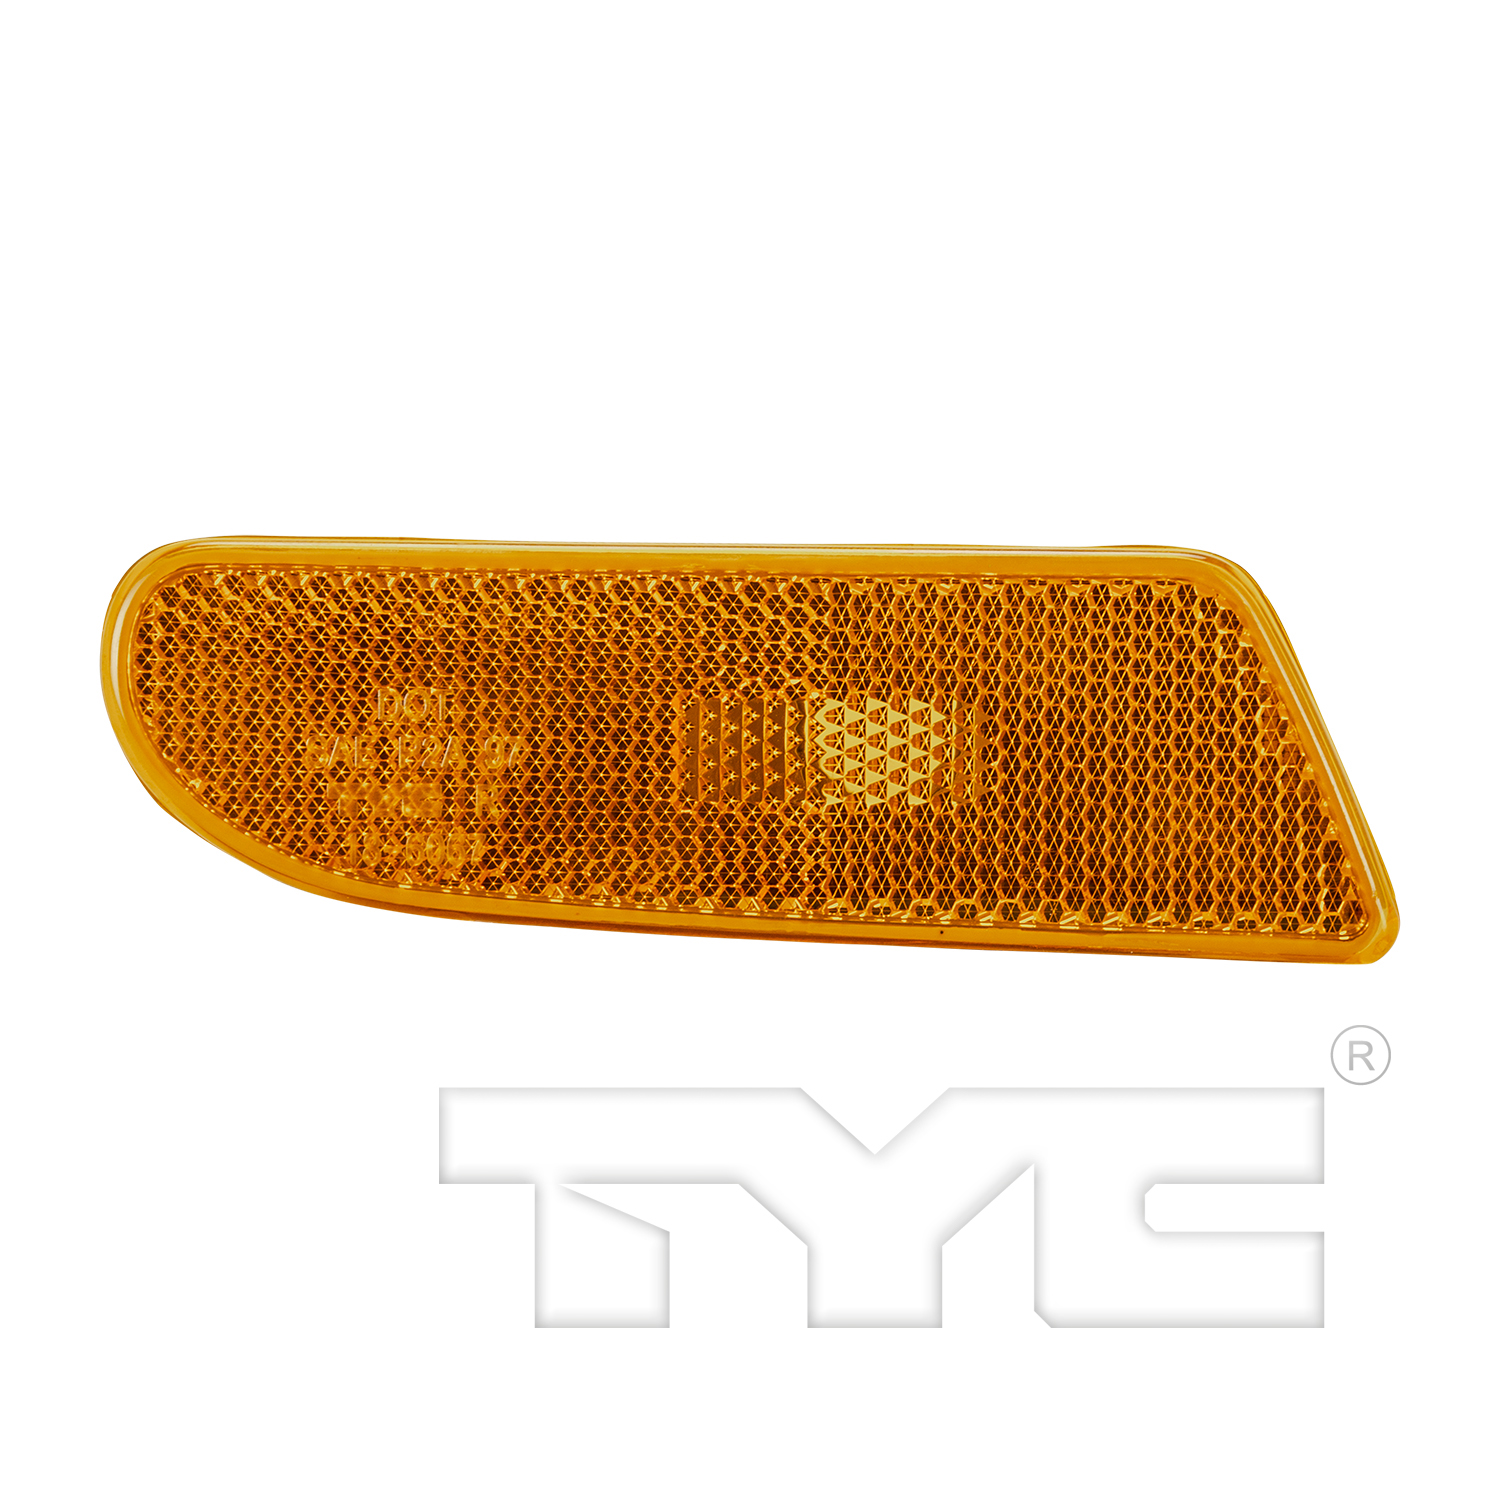 Aftermarket LAMPS for MERCEDES-BENZ - S430, S430,00-06,RT Front marker lamp lens